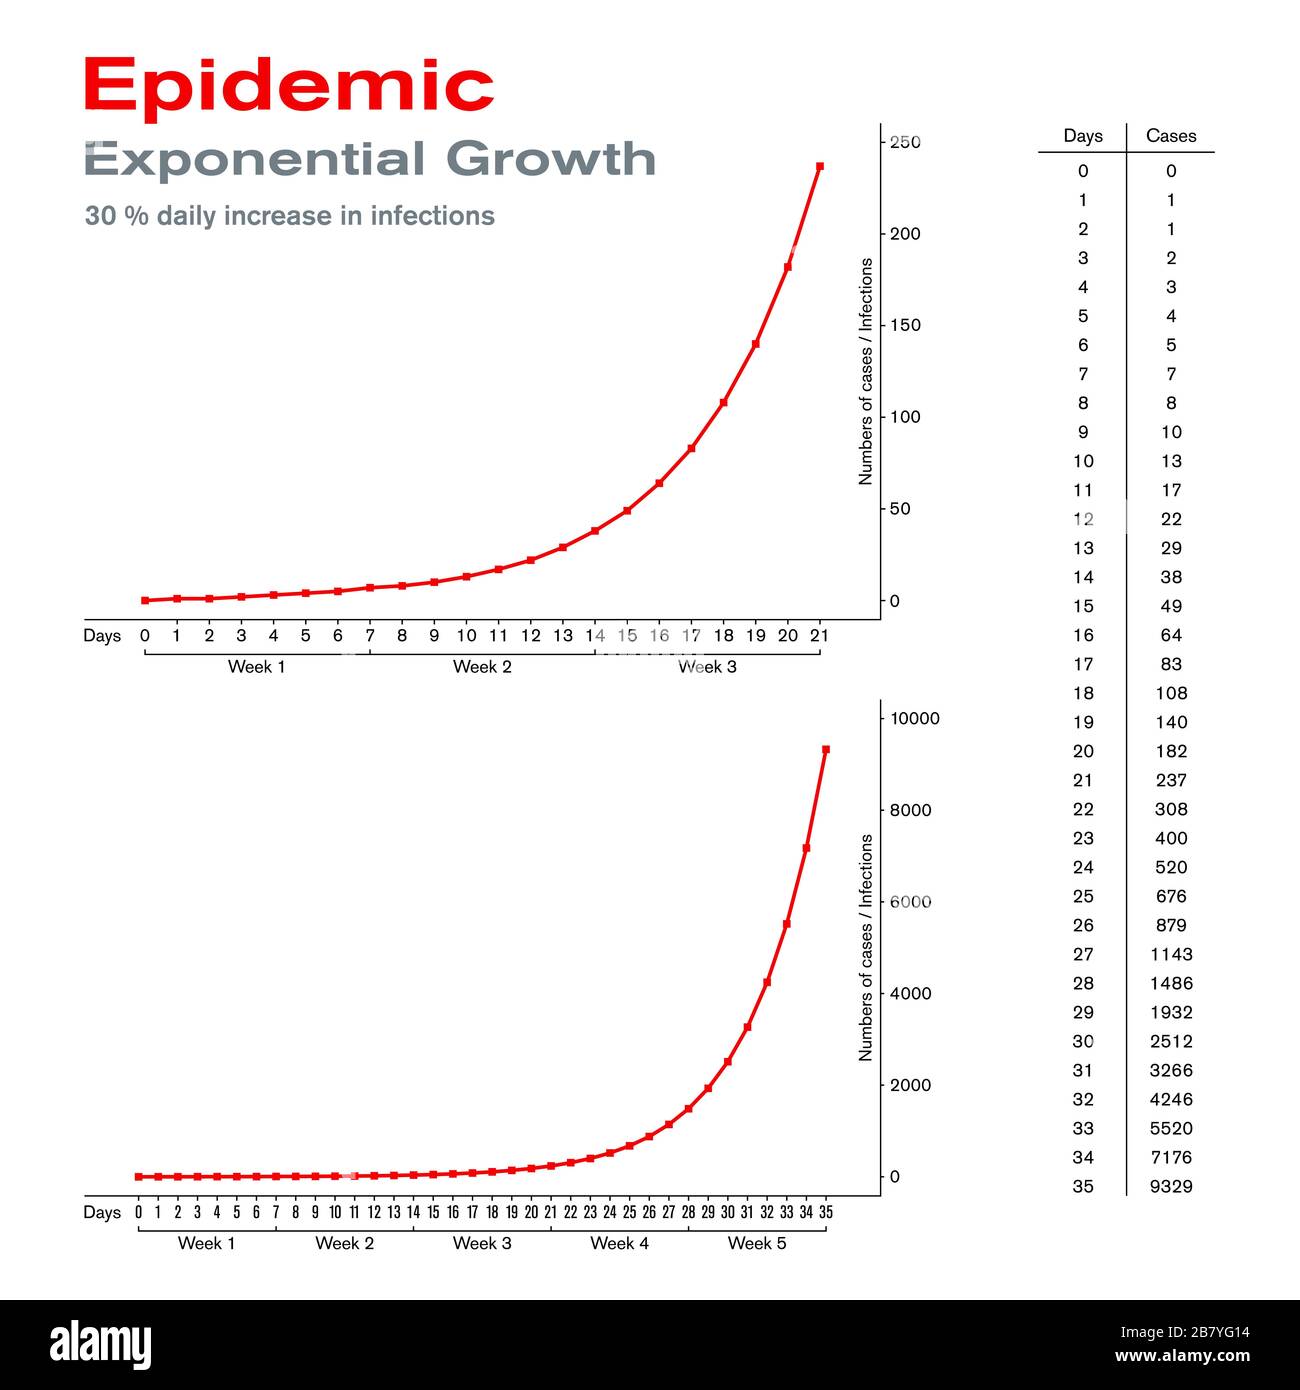 Epidemic. Exponential growth. On the example of 30 percent daily increase in infections. Rapid spread and epidemic outbreak of a disease. Stock Photo